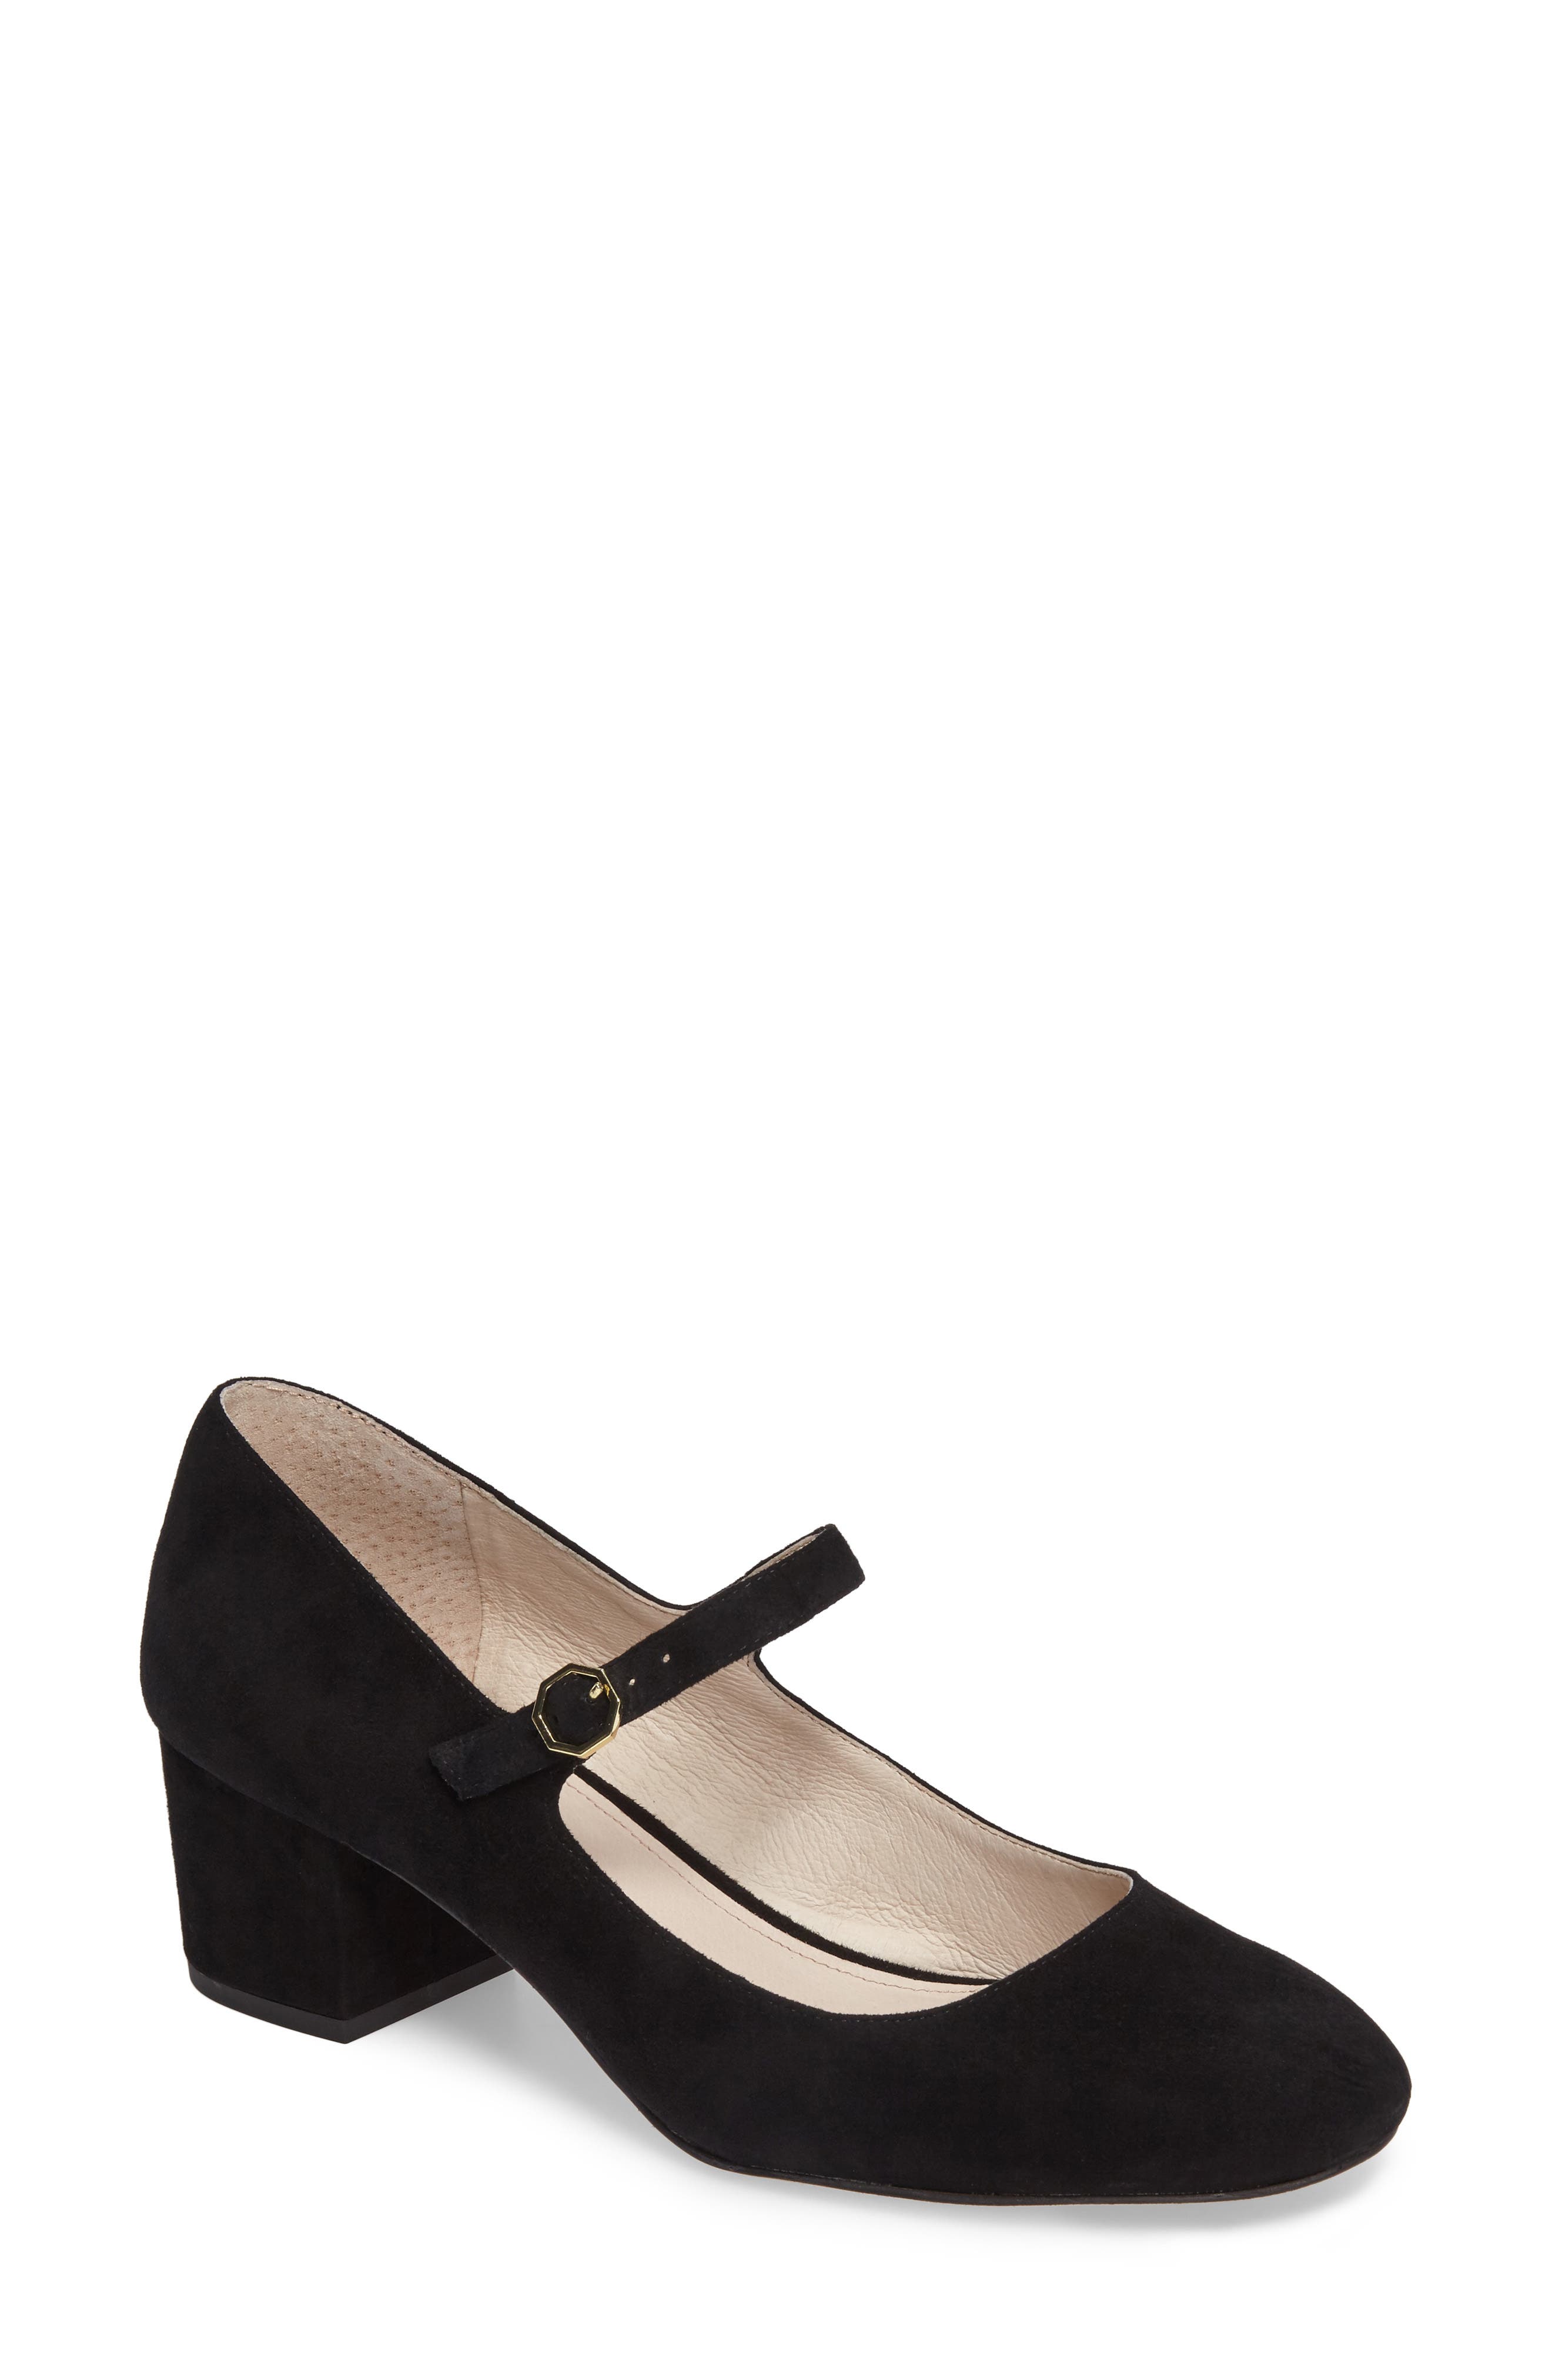 louise et cie mary jane shoes